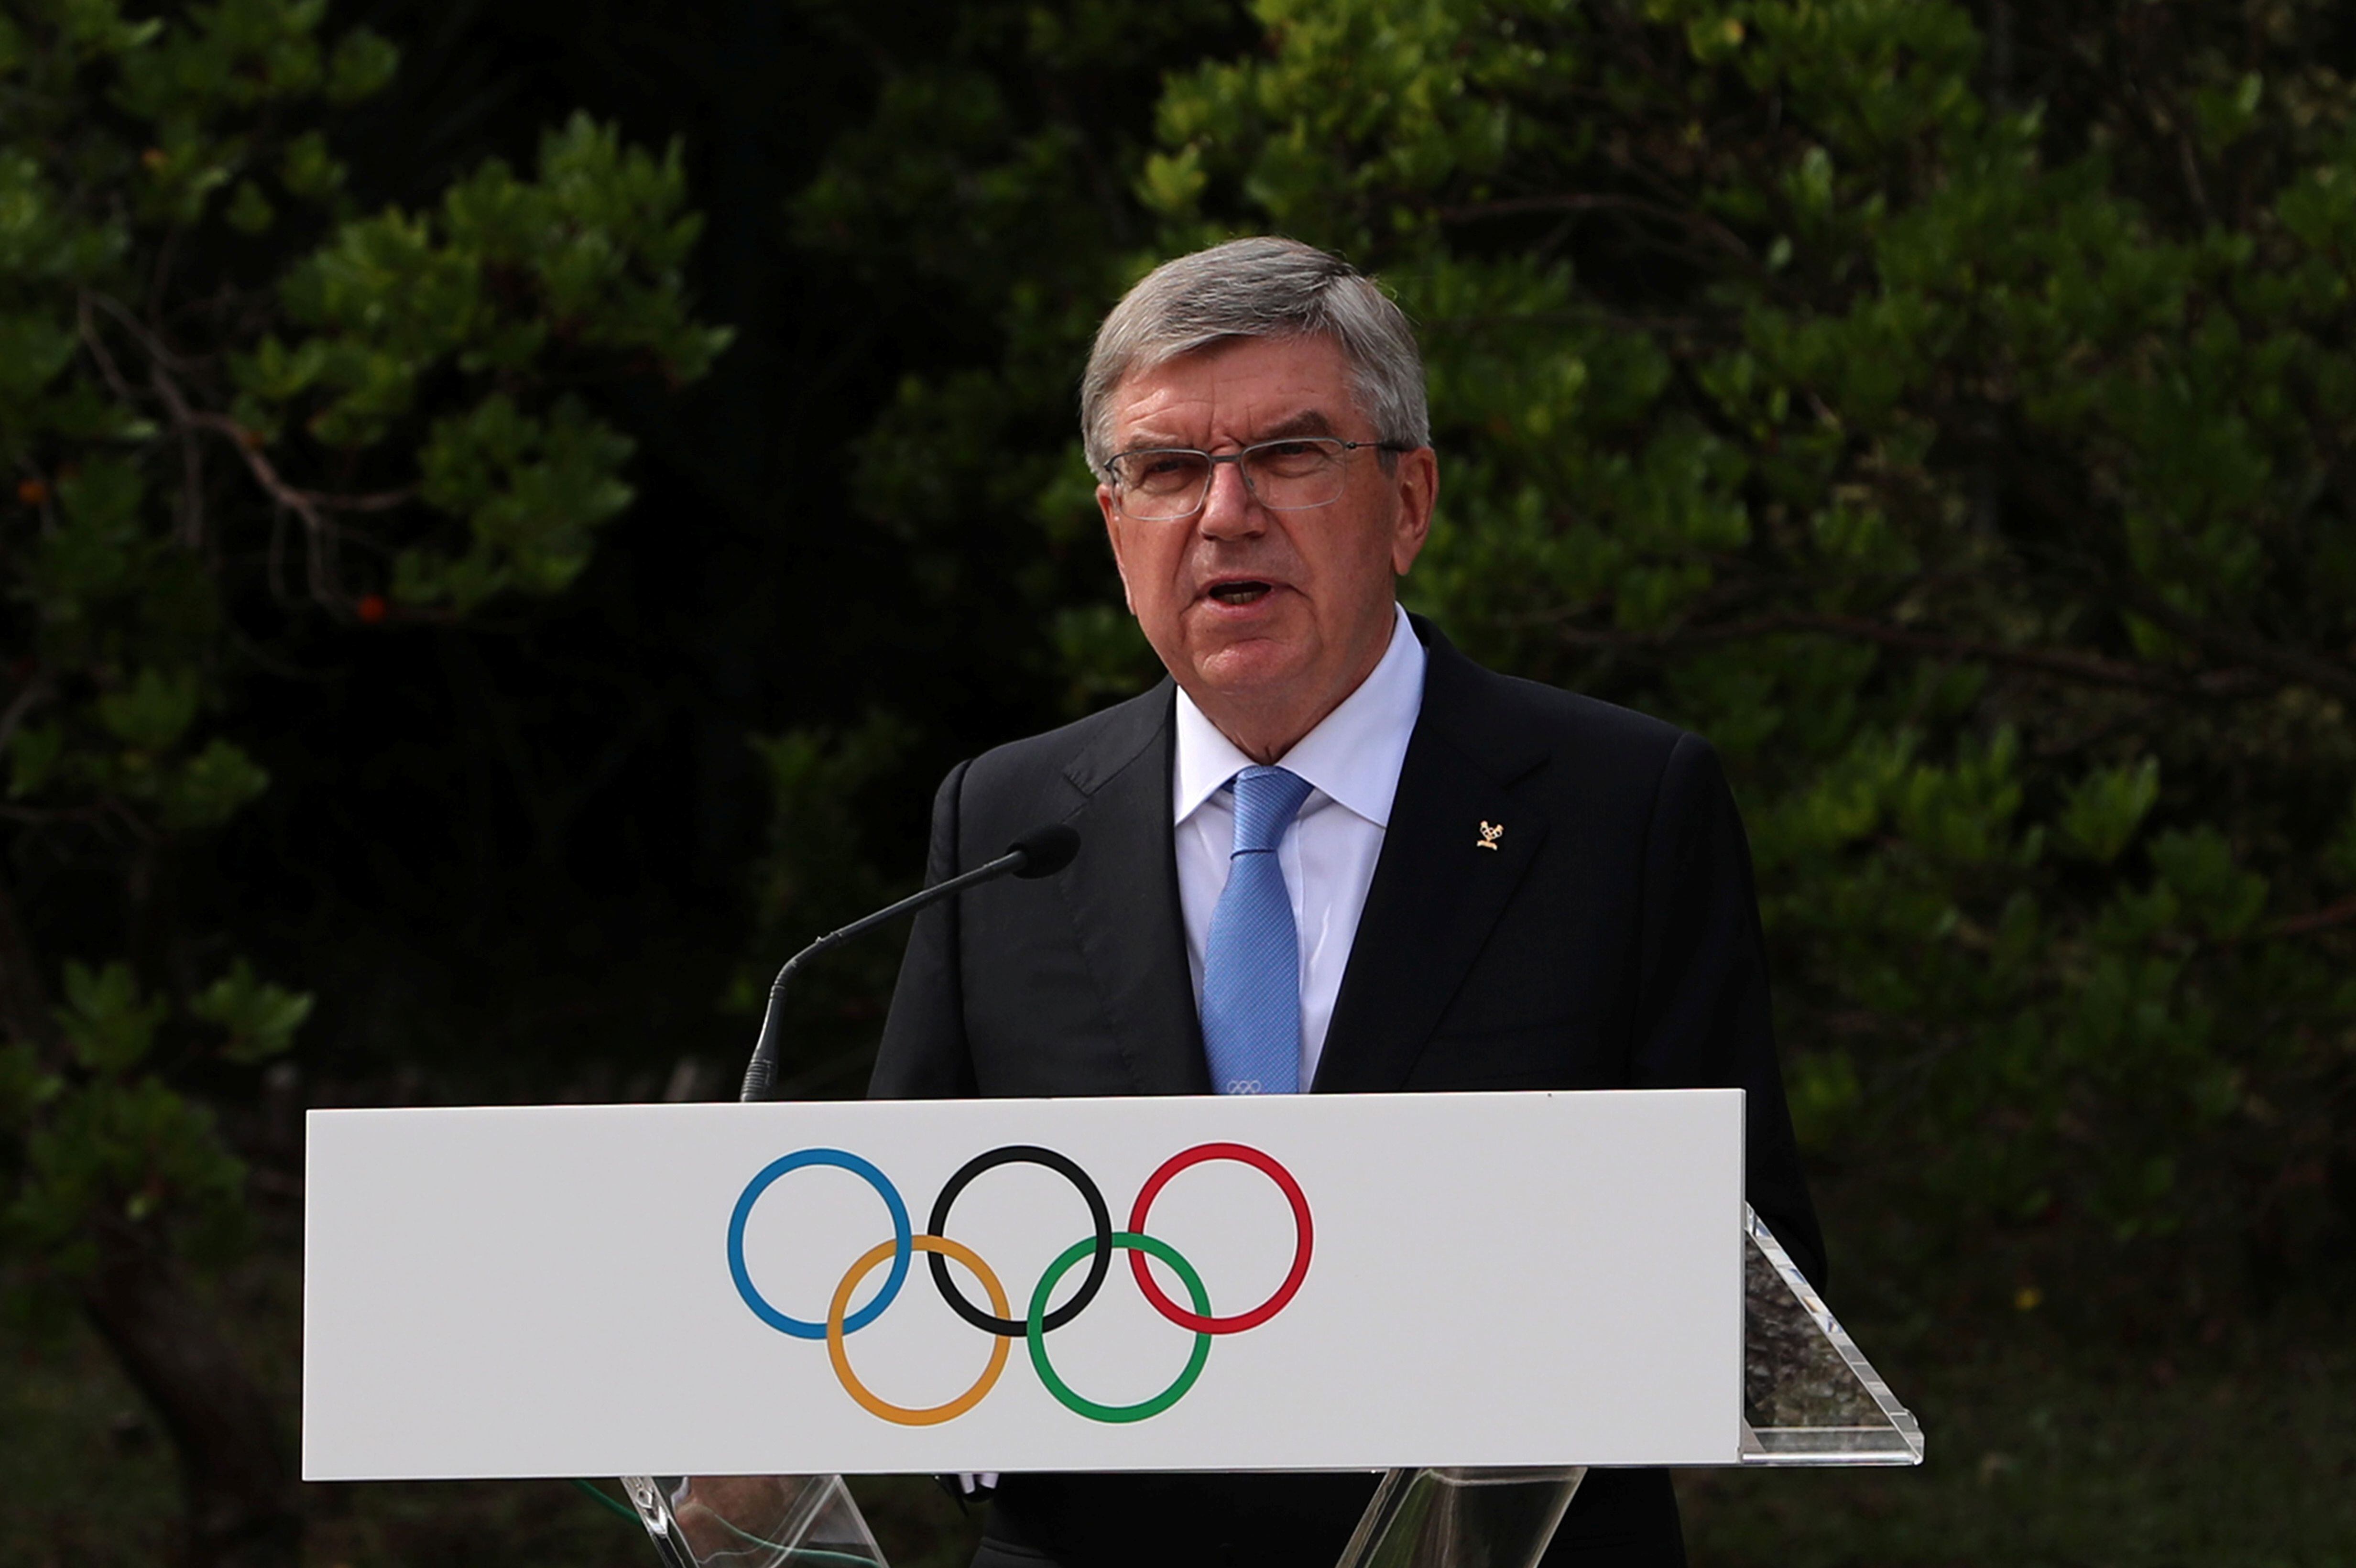 President of the International Olympic Committee (IOC) Thomas Bach delivers a speech at the Pierre de Coubertin monument, where the founder of the IOC's heart is buried, during a ceremony for the 100-year anniversary of the creation of the IOC Executive Board, in Ancient Olympia, Greece, October 17, 2021. REUTERS/Costas Baltas